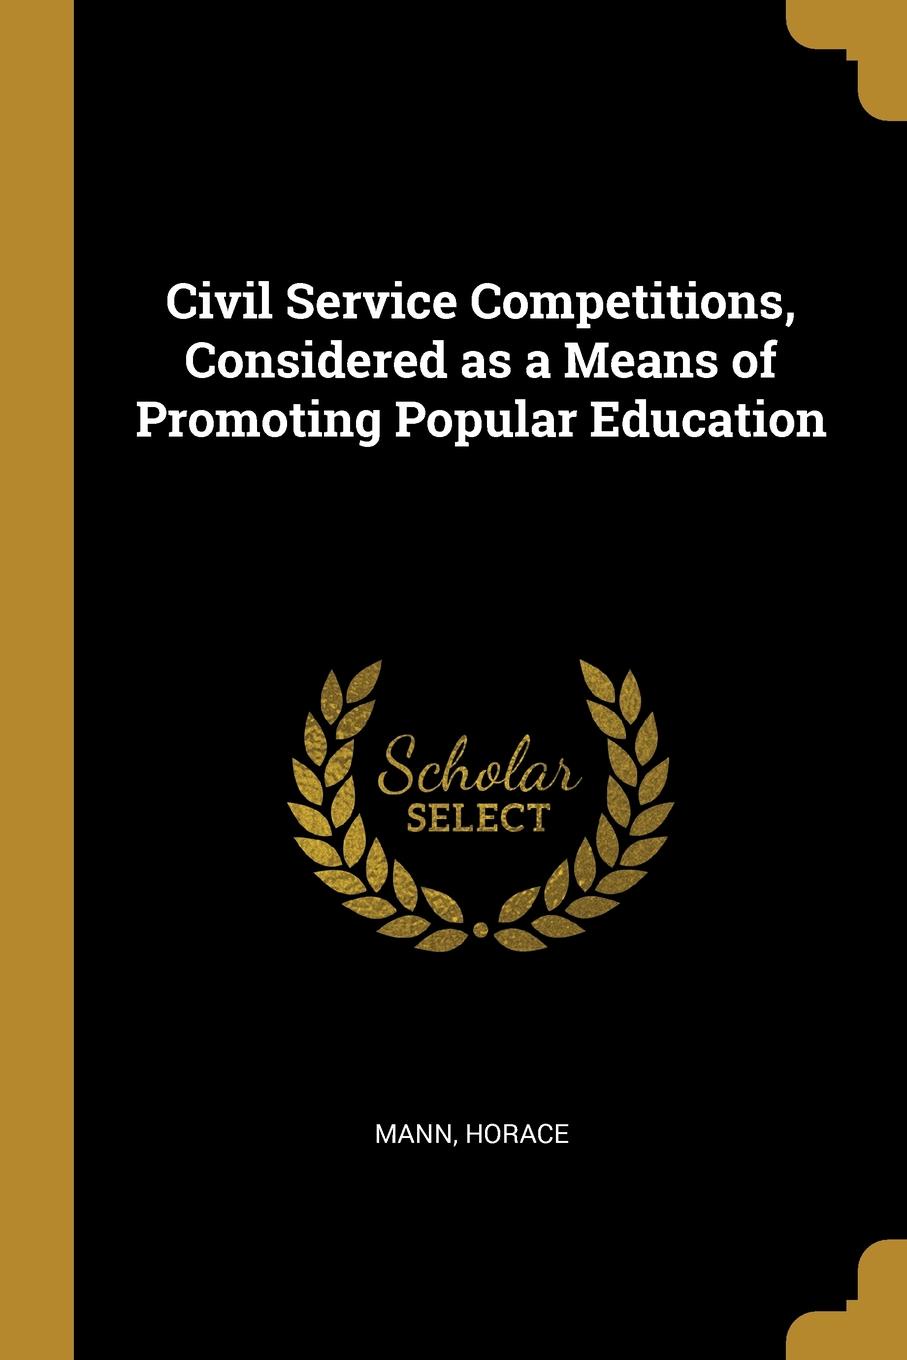 Civil Service Competitions, Considered as a Means of Promoting Popular Education